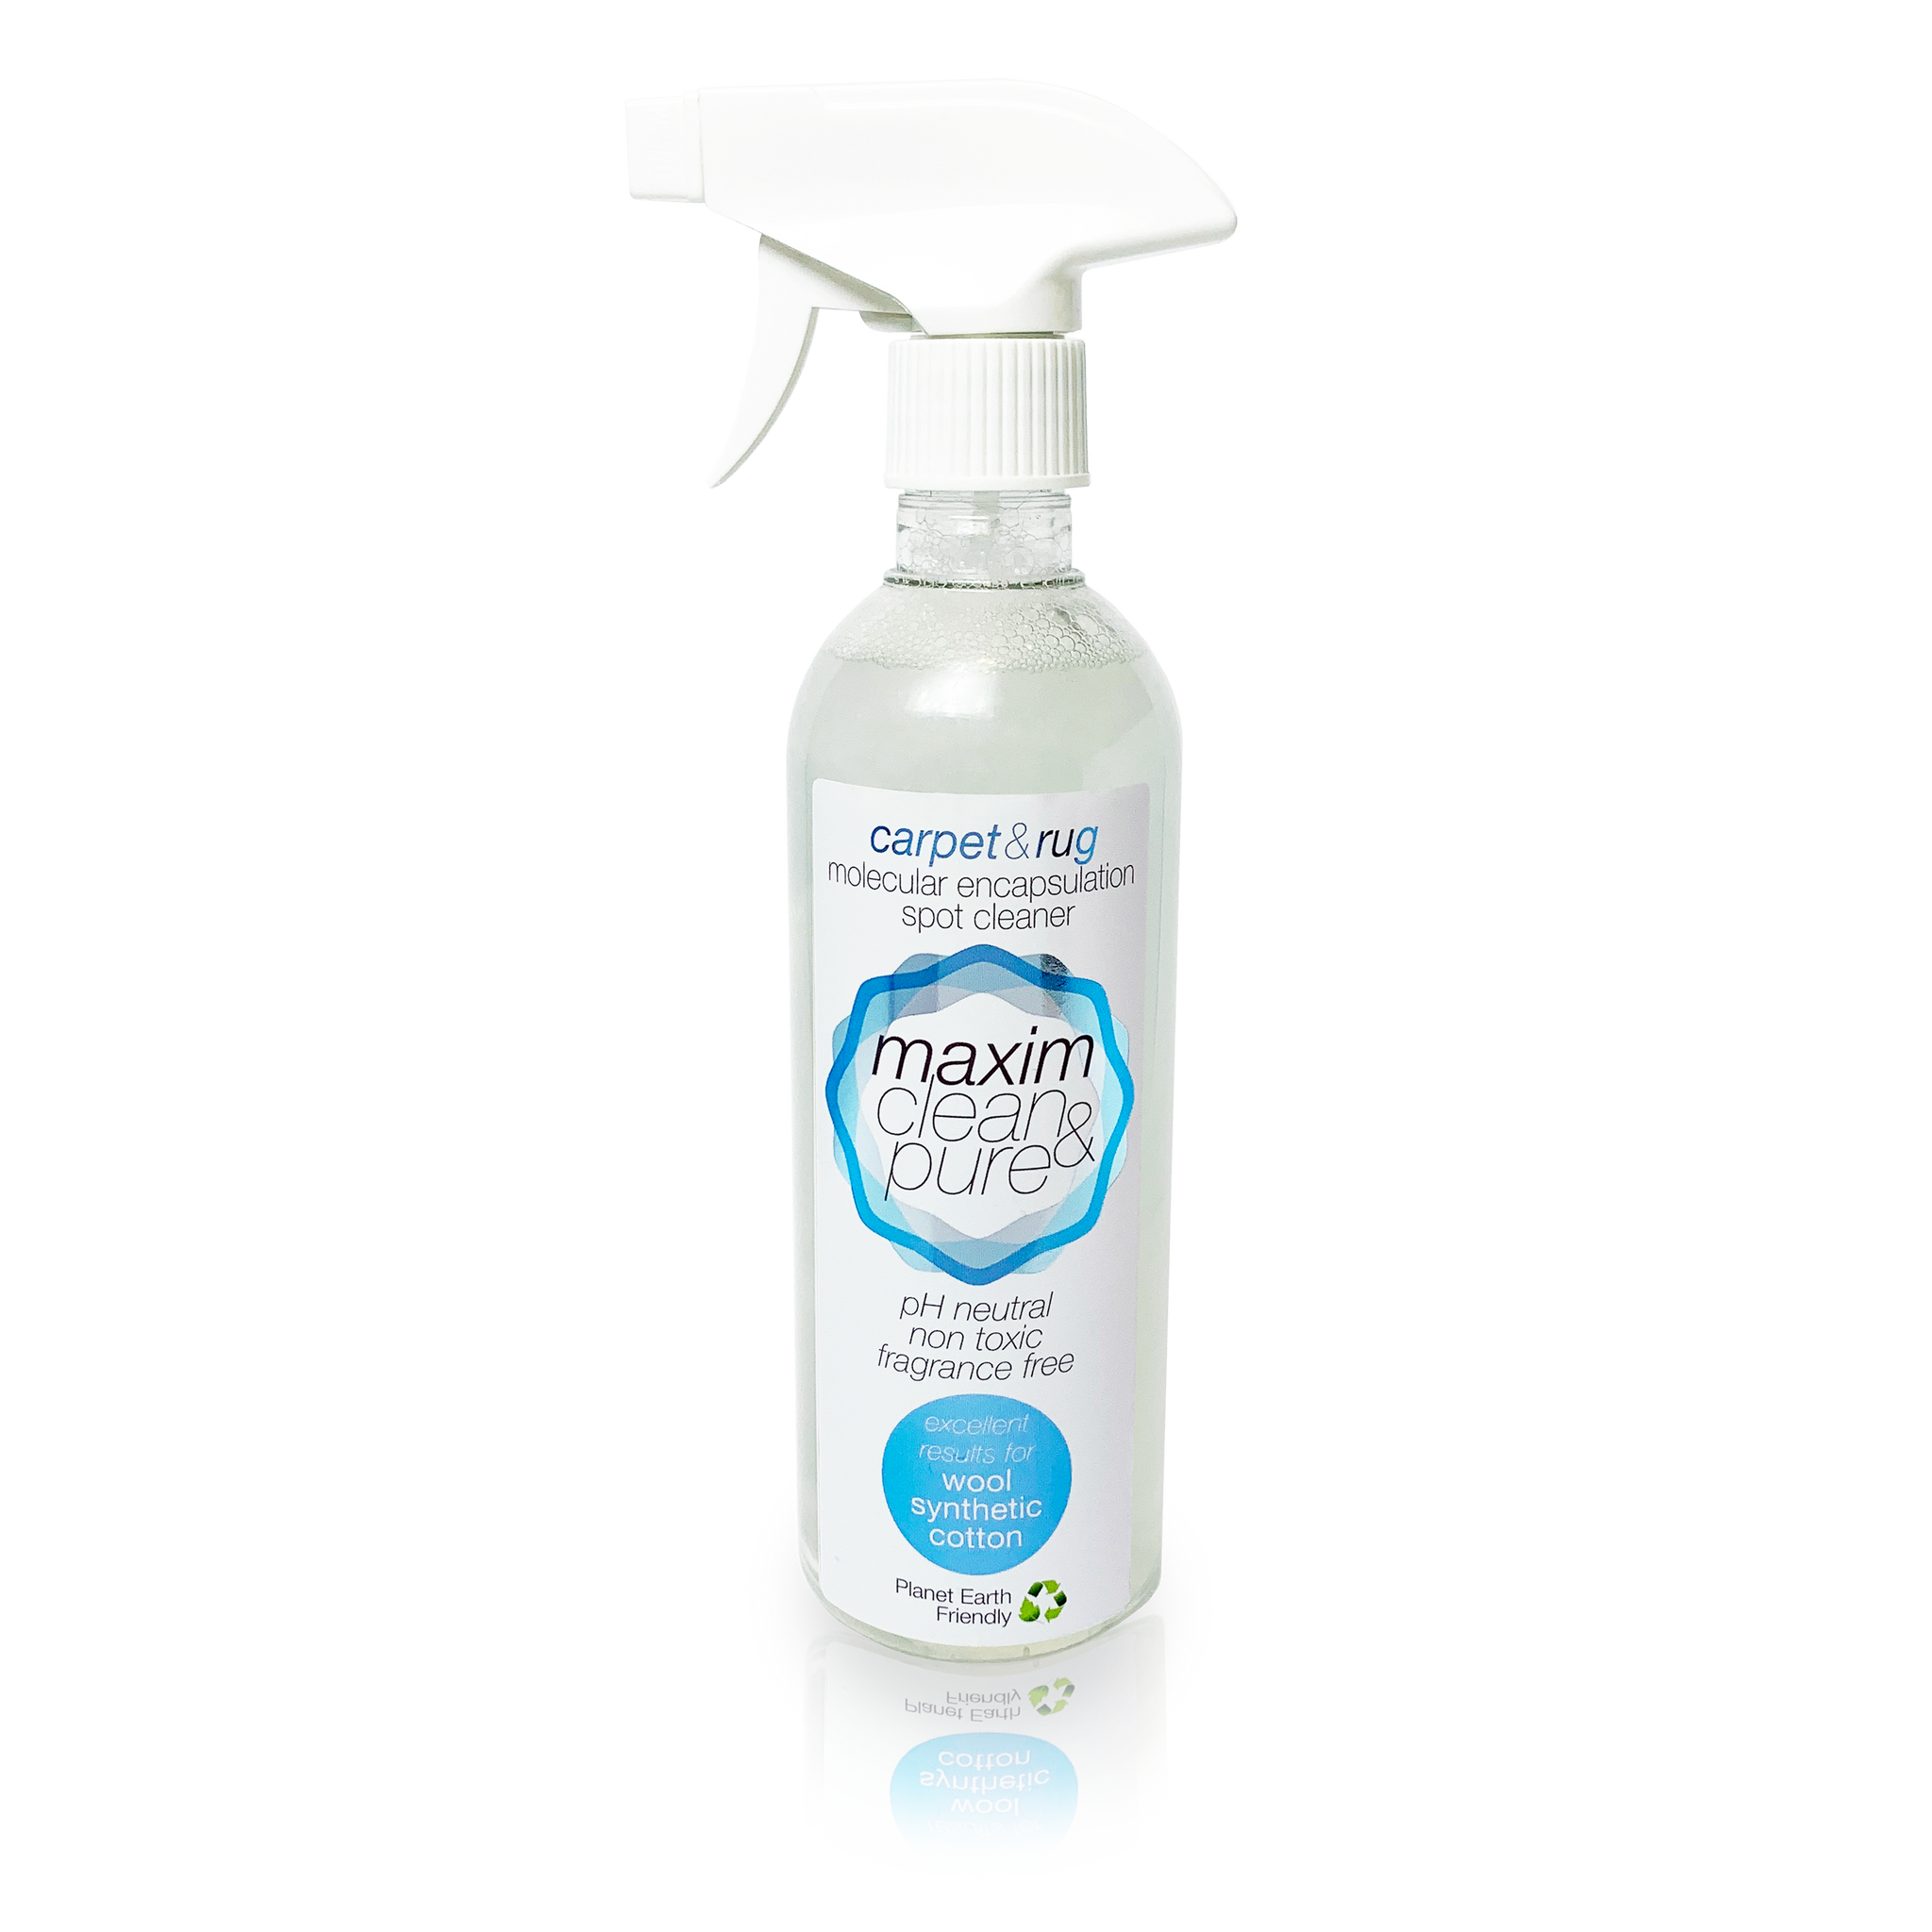 Cleanovation The Spotty ~ Carpet and Ceramic Tile Cleaning Brush, Stain and Dirt Remover for Carpet and Area Rug